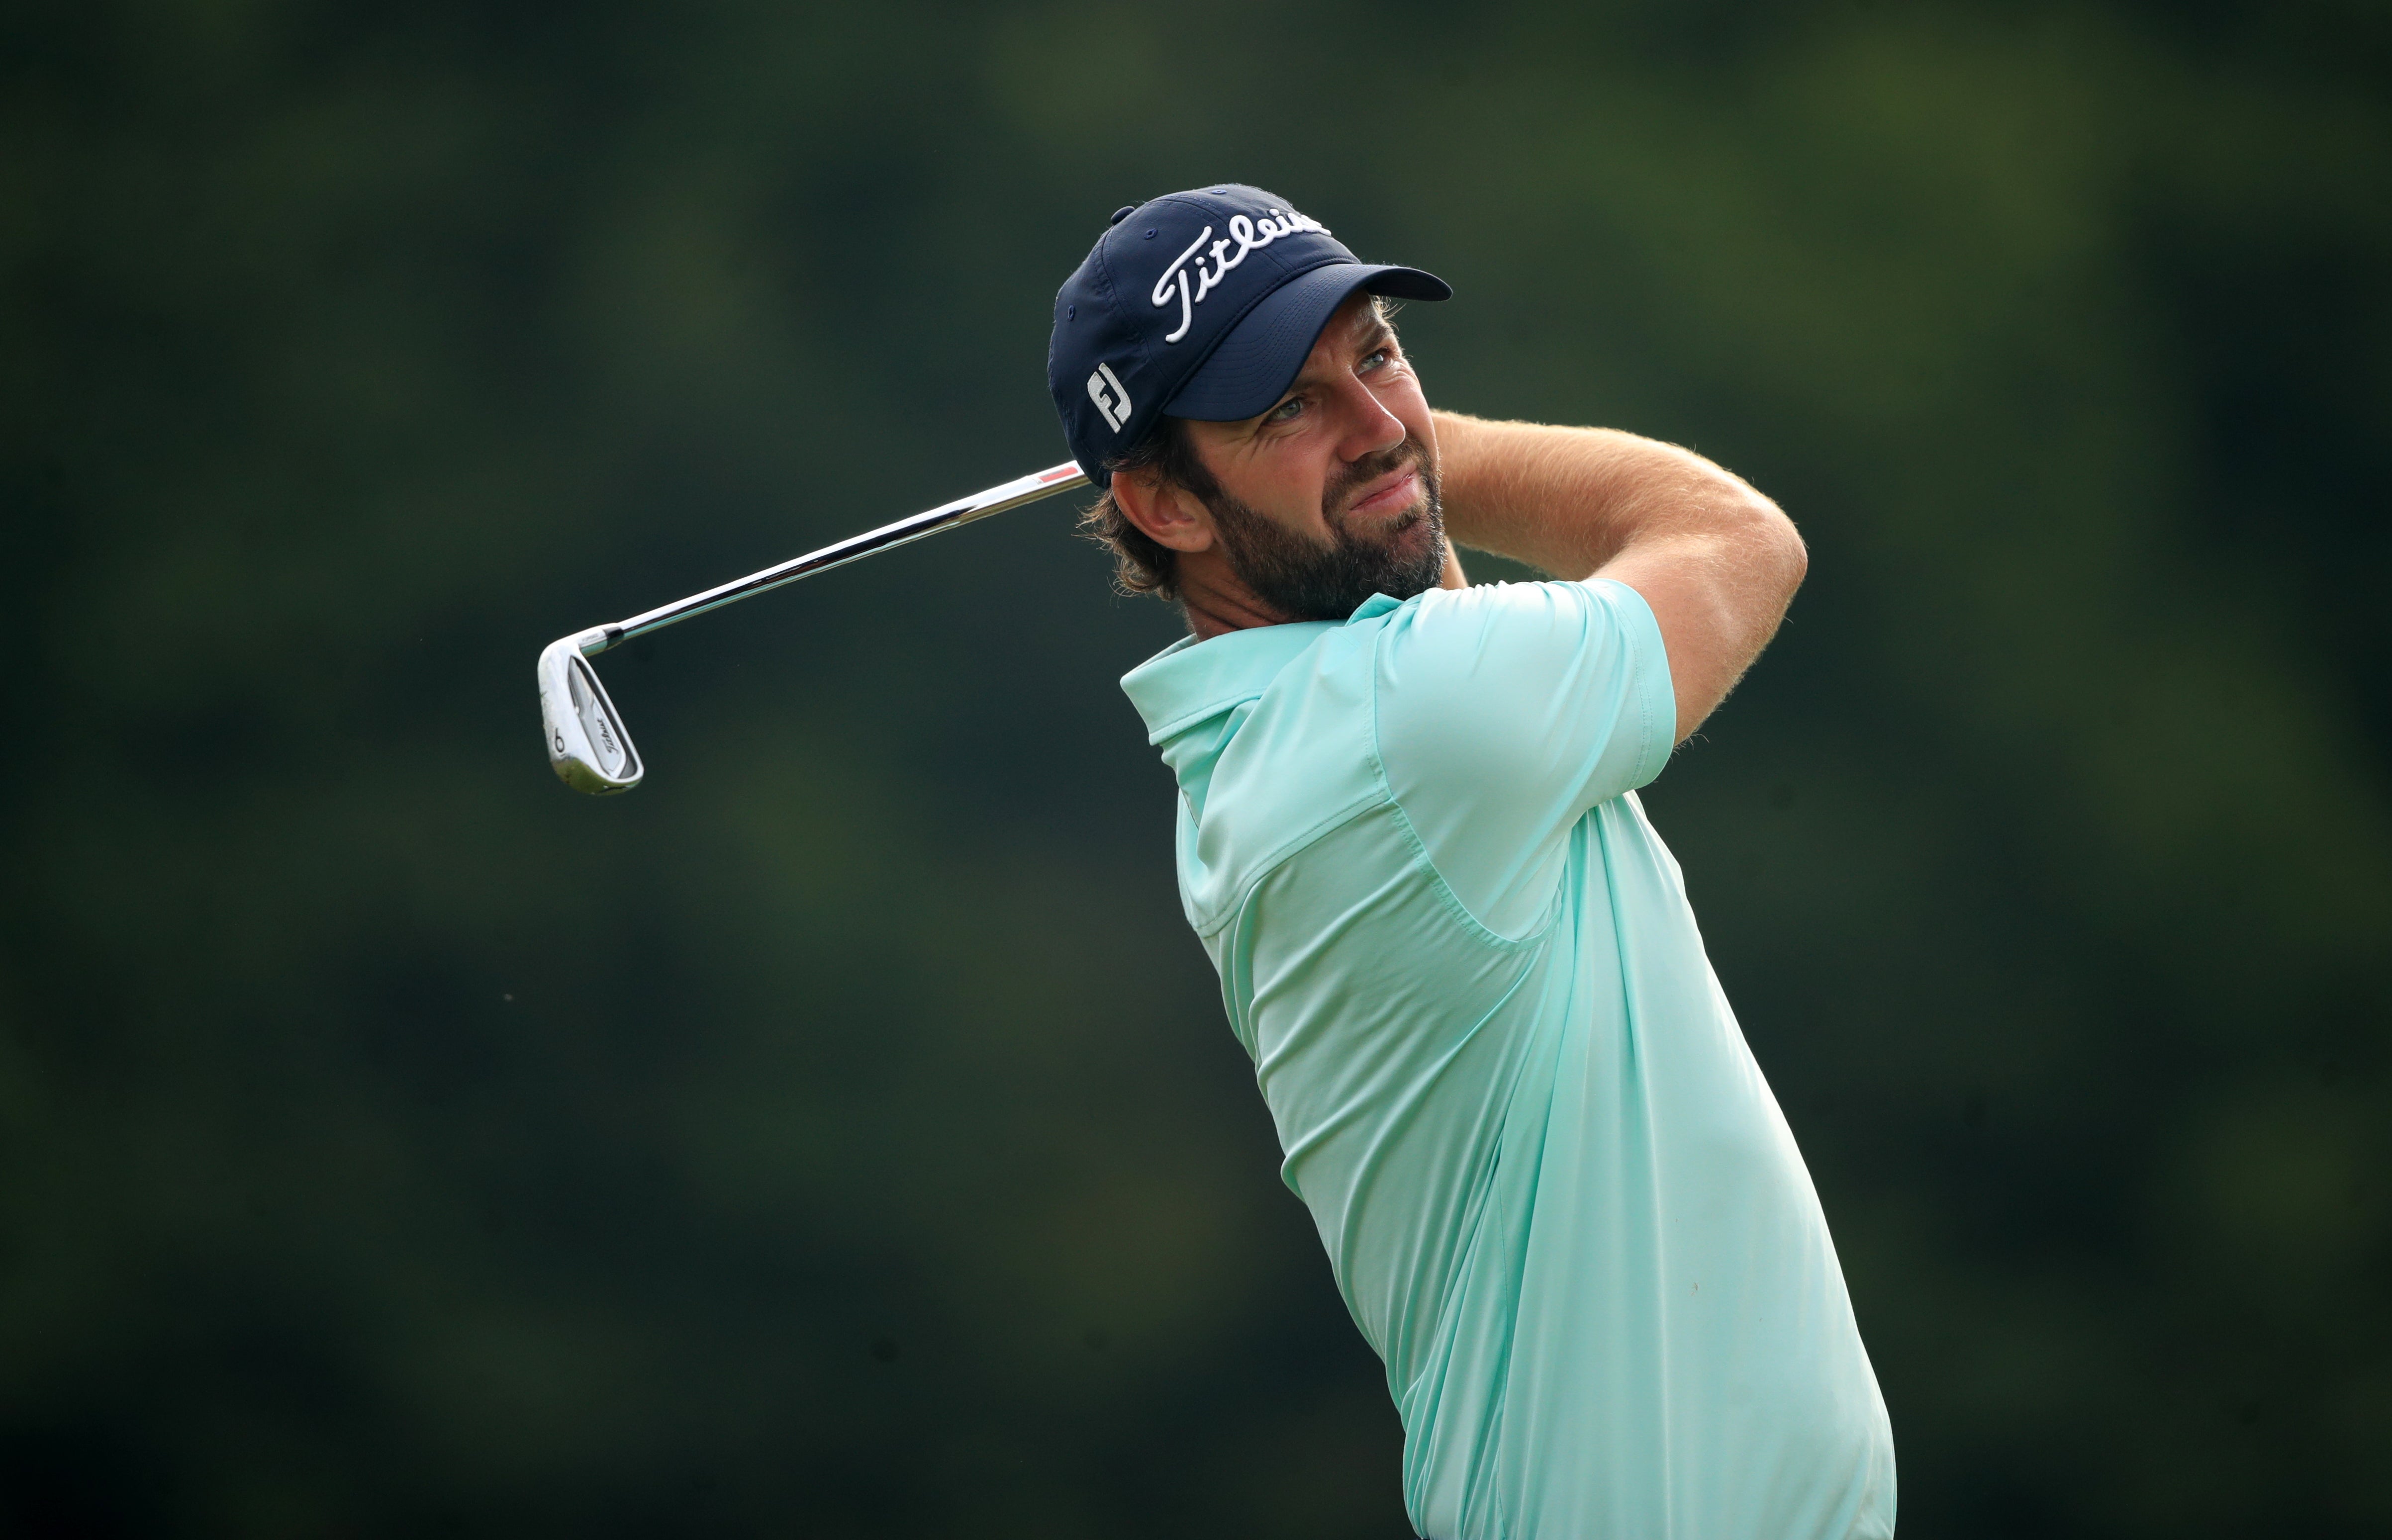 Scotland’s Scott Jamieson held a one-shot lead after the opening day in Abu Dhabi (Adam Davy/PA)